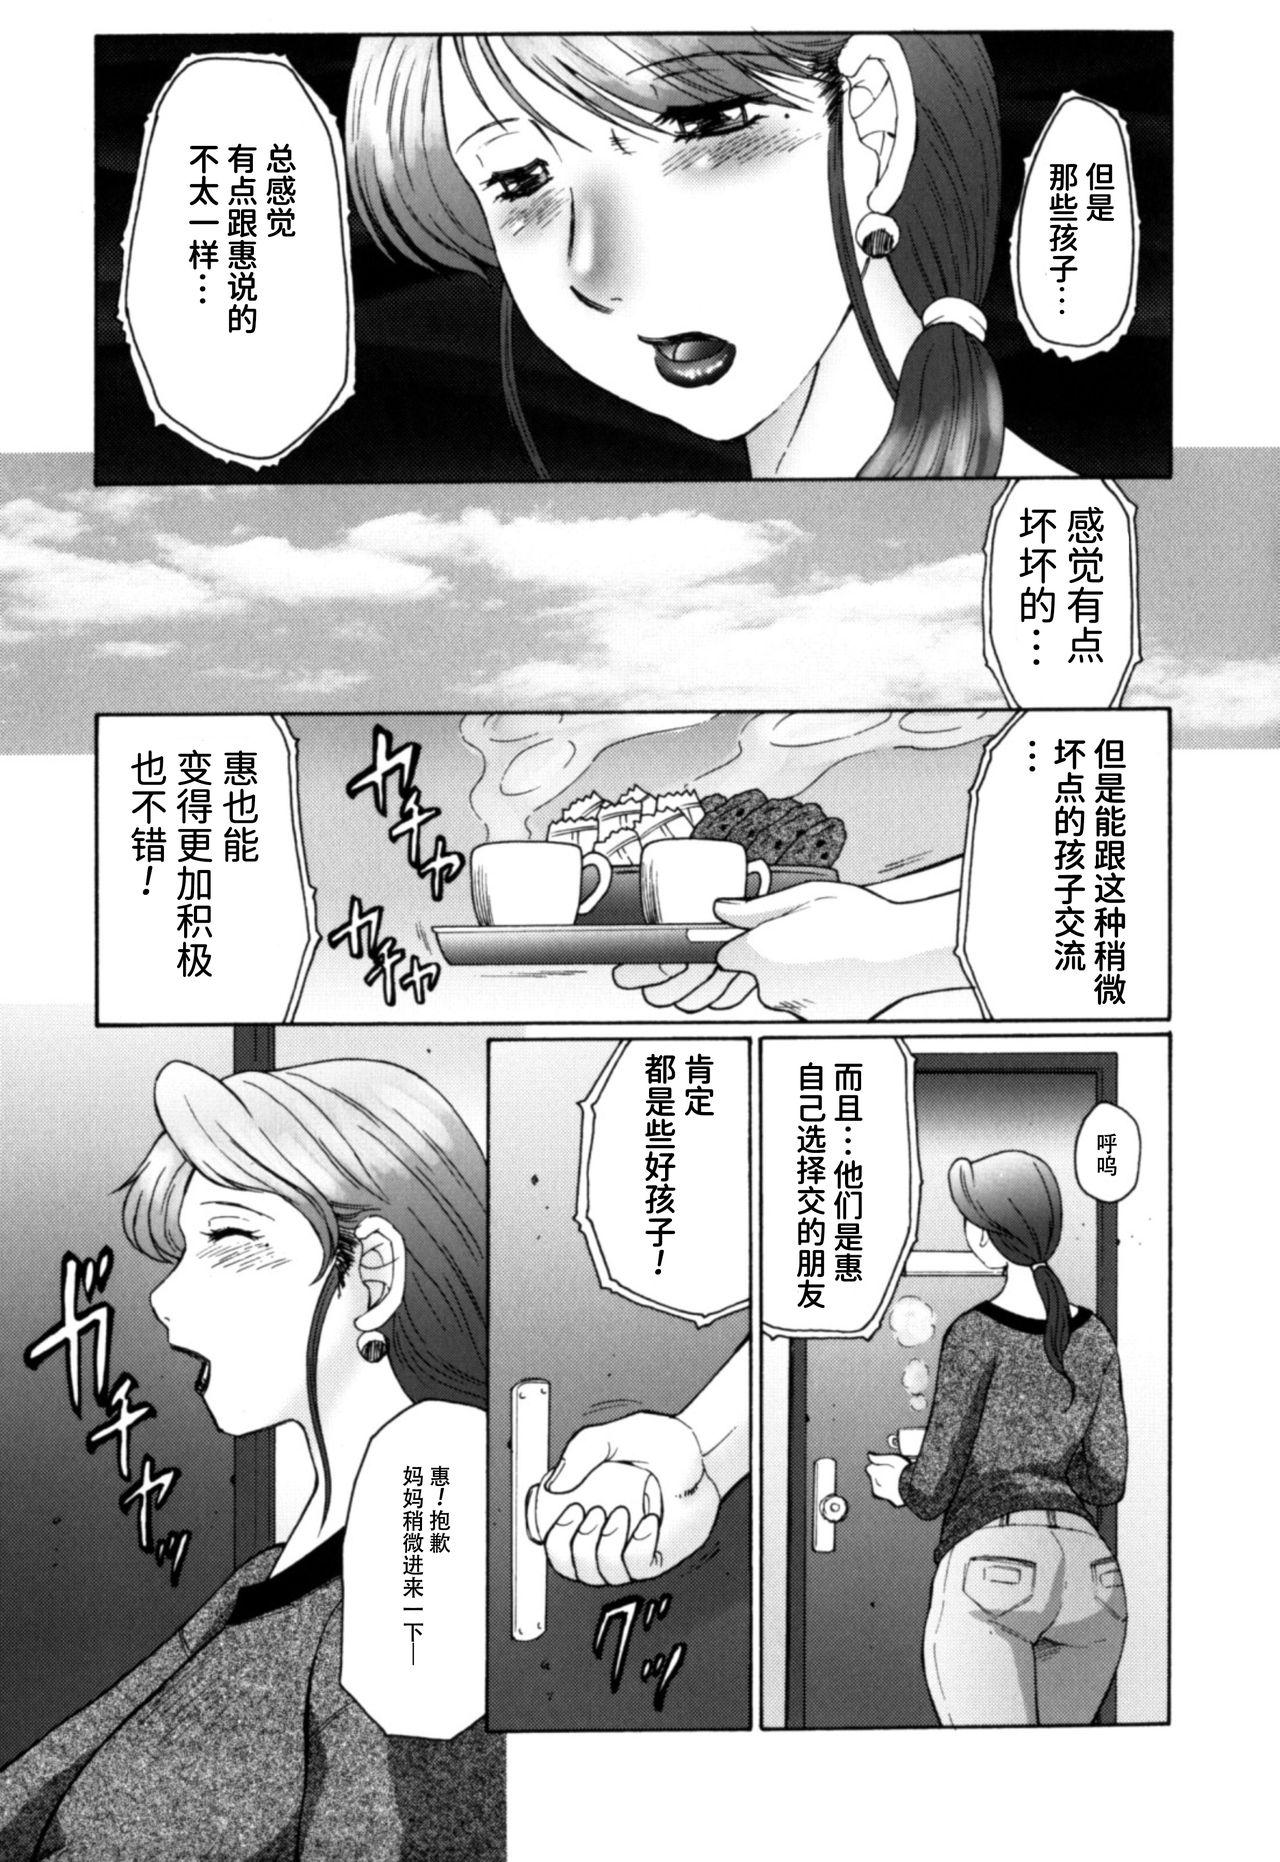 Vip [Fuusen Club] Haha Mamire Ch. 1 [Chinese]【不可视汉化】 Cowgirl - Page 6